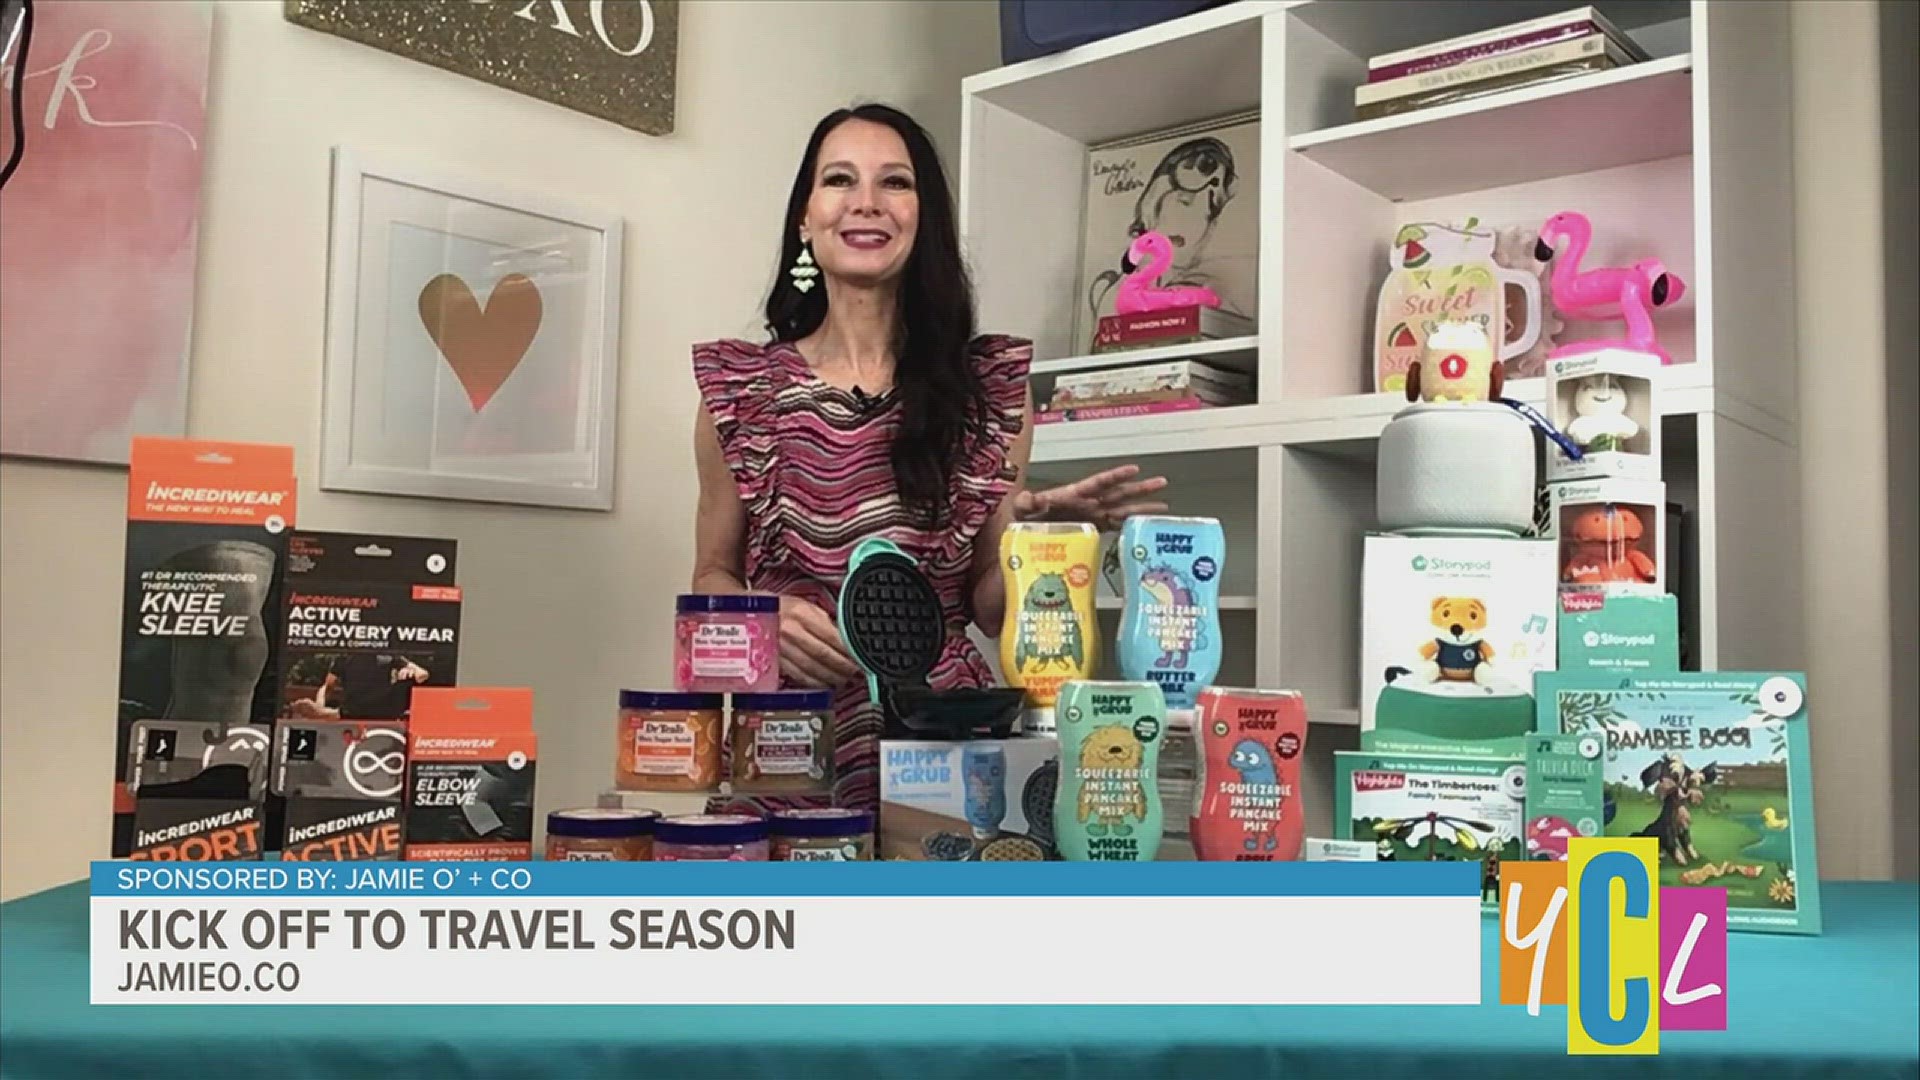 Here are some must-have products for enjoying time at home, entertaining or taking a fun trip away! This segment is paid for by Jamie O’ + Co.